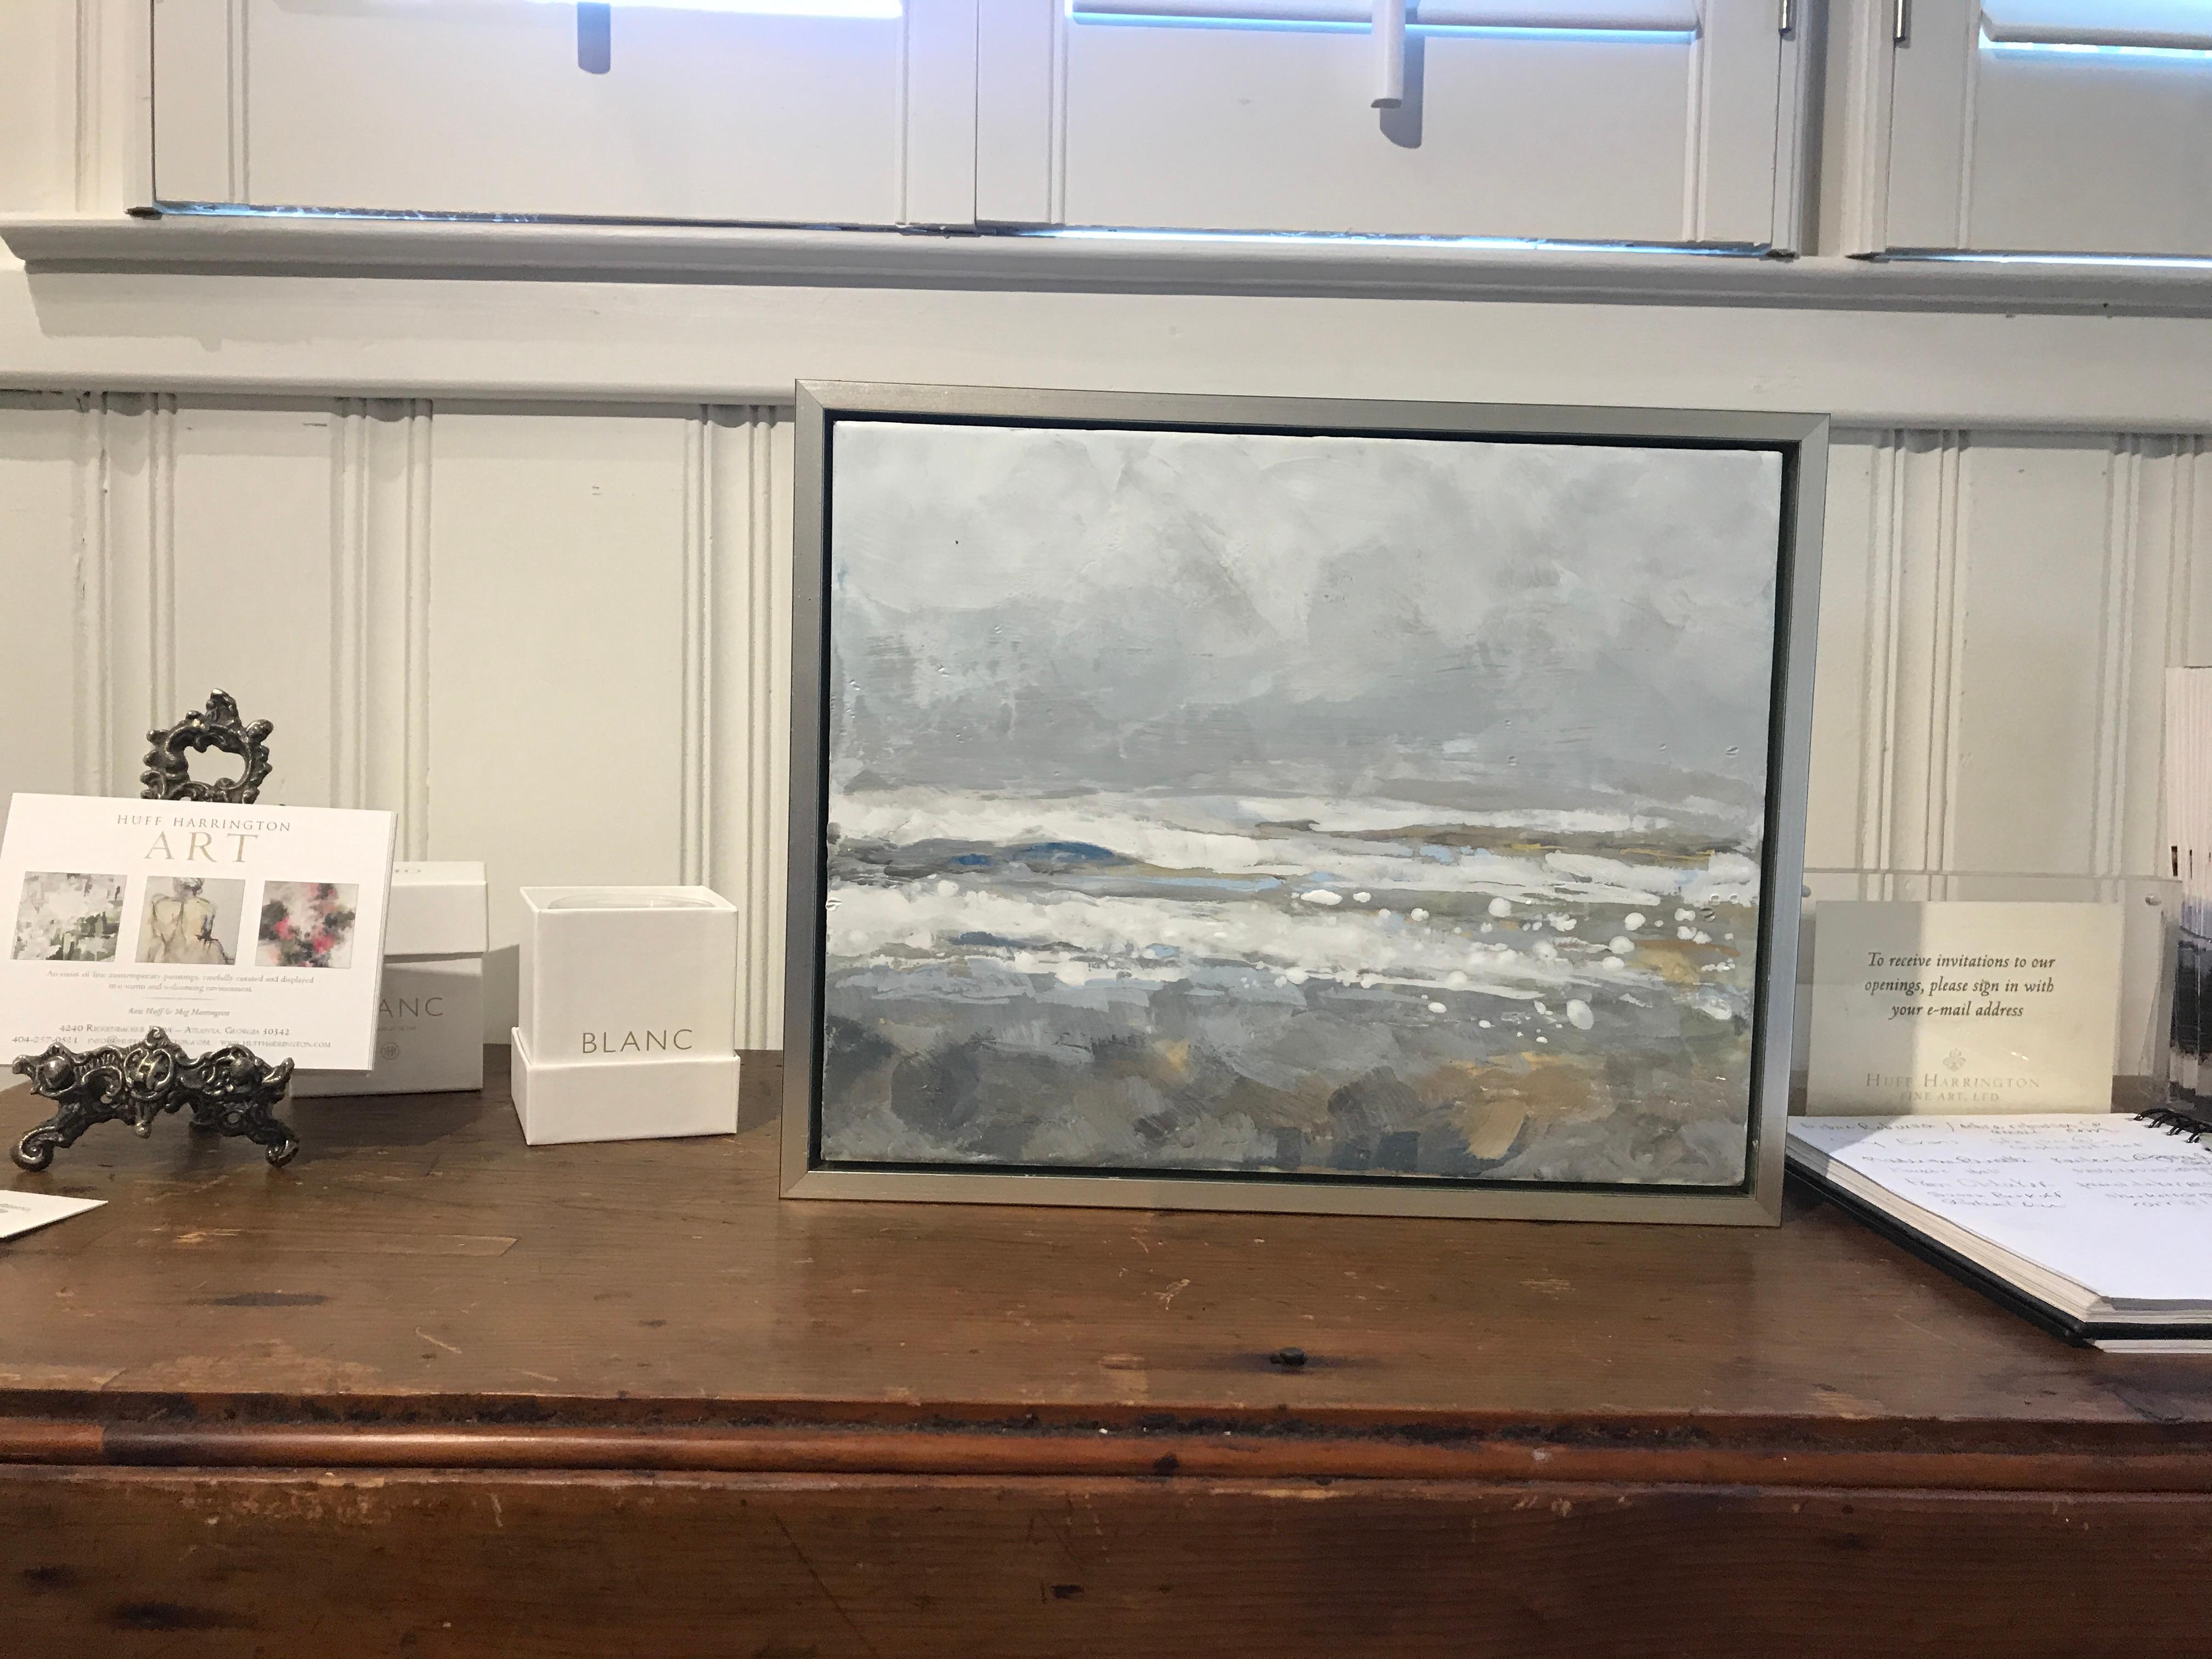 'Salt Tipped' is a small silver framed abstract encaustic on board seascape painting created by American artist Maureen Naughton in 2019. Featuring a delicate palette made of grey, white, brown, gold and soft blue tones, the painting, leaning